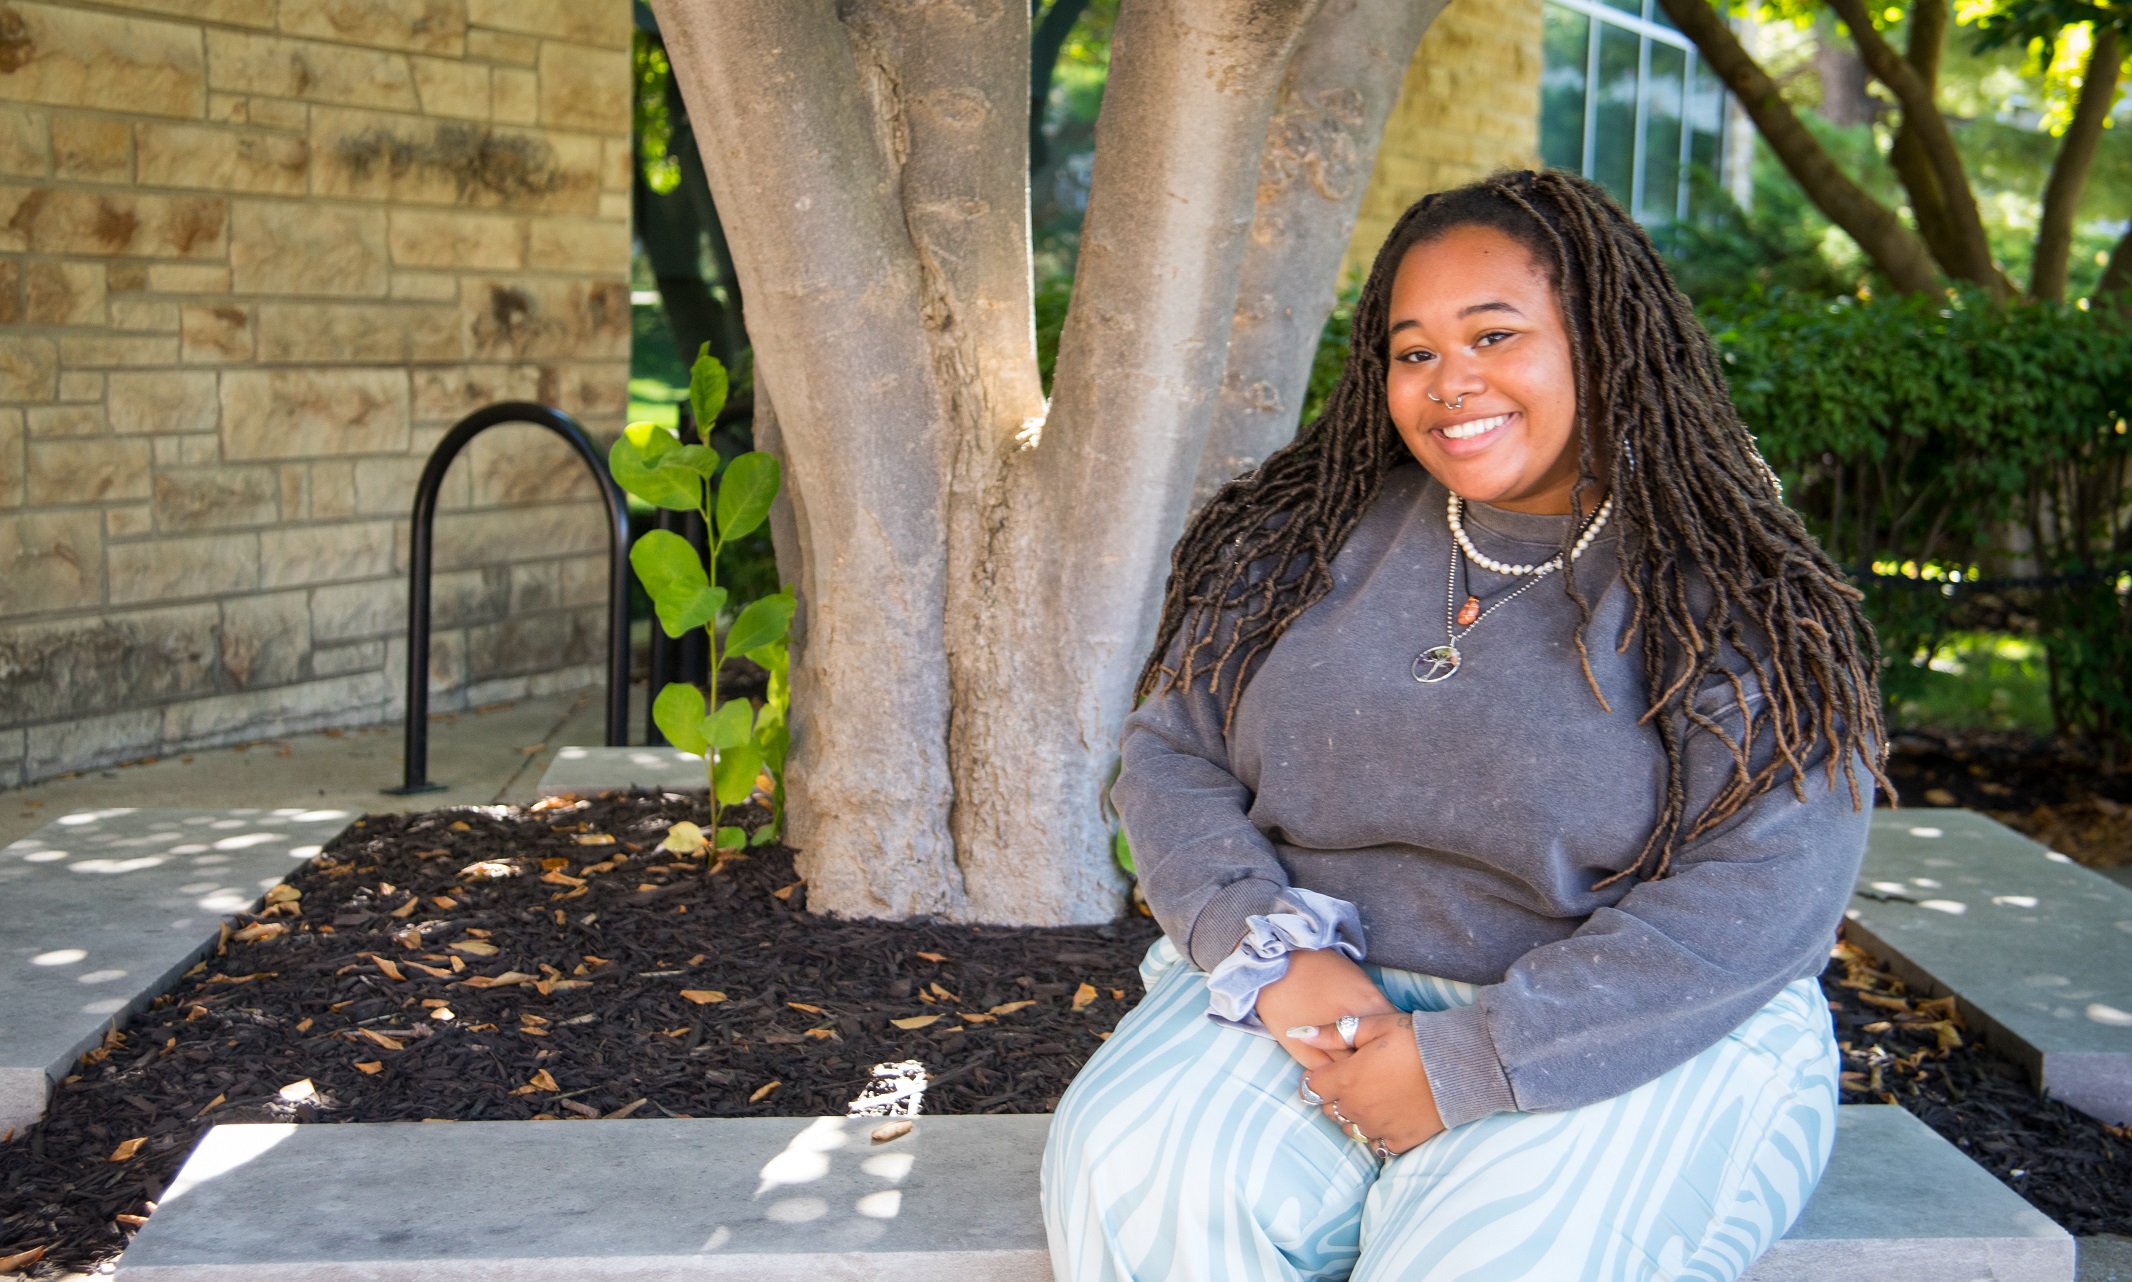 Ophelia Griffin, wearing jeans and a gray sweater, sits on a bench in front of a tree and smiles at the camera.